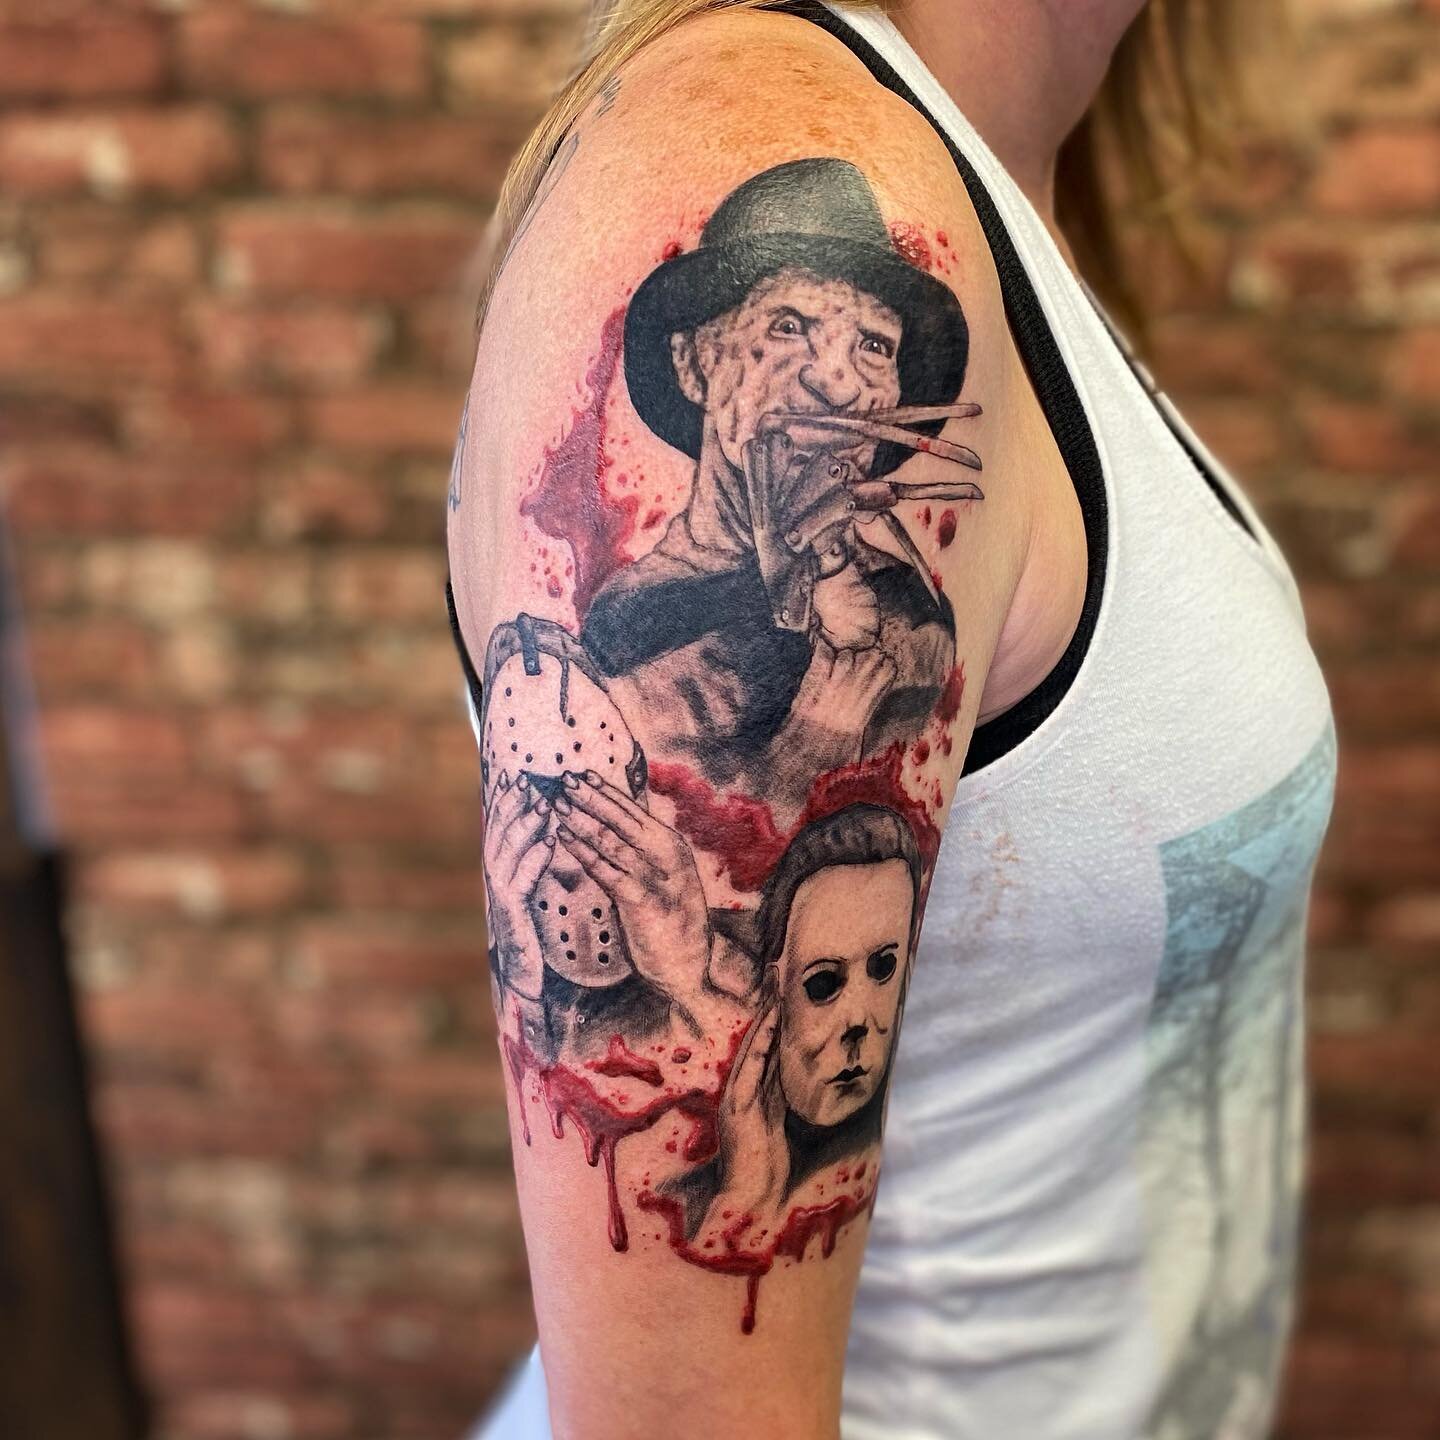 Traditional Michael Myers tattoos can look really scary